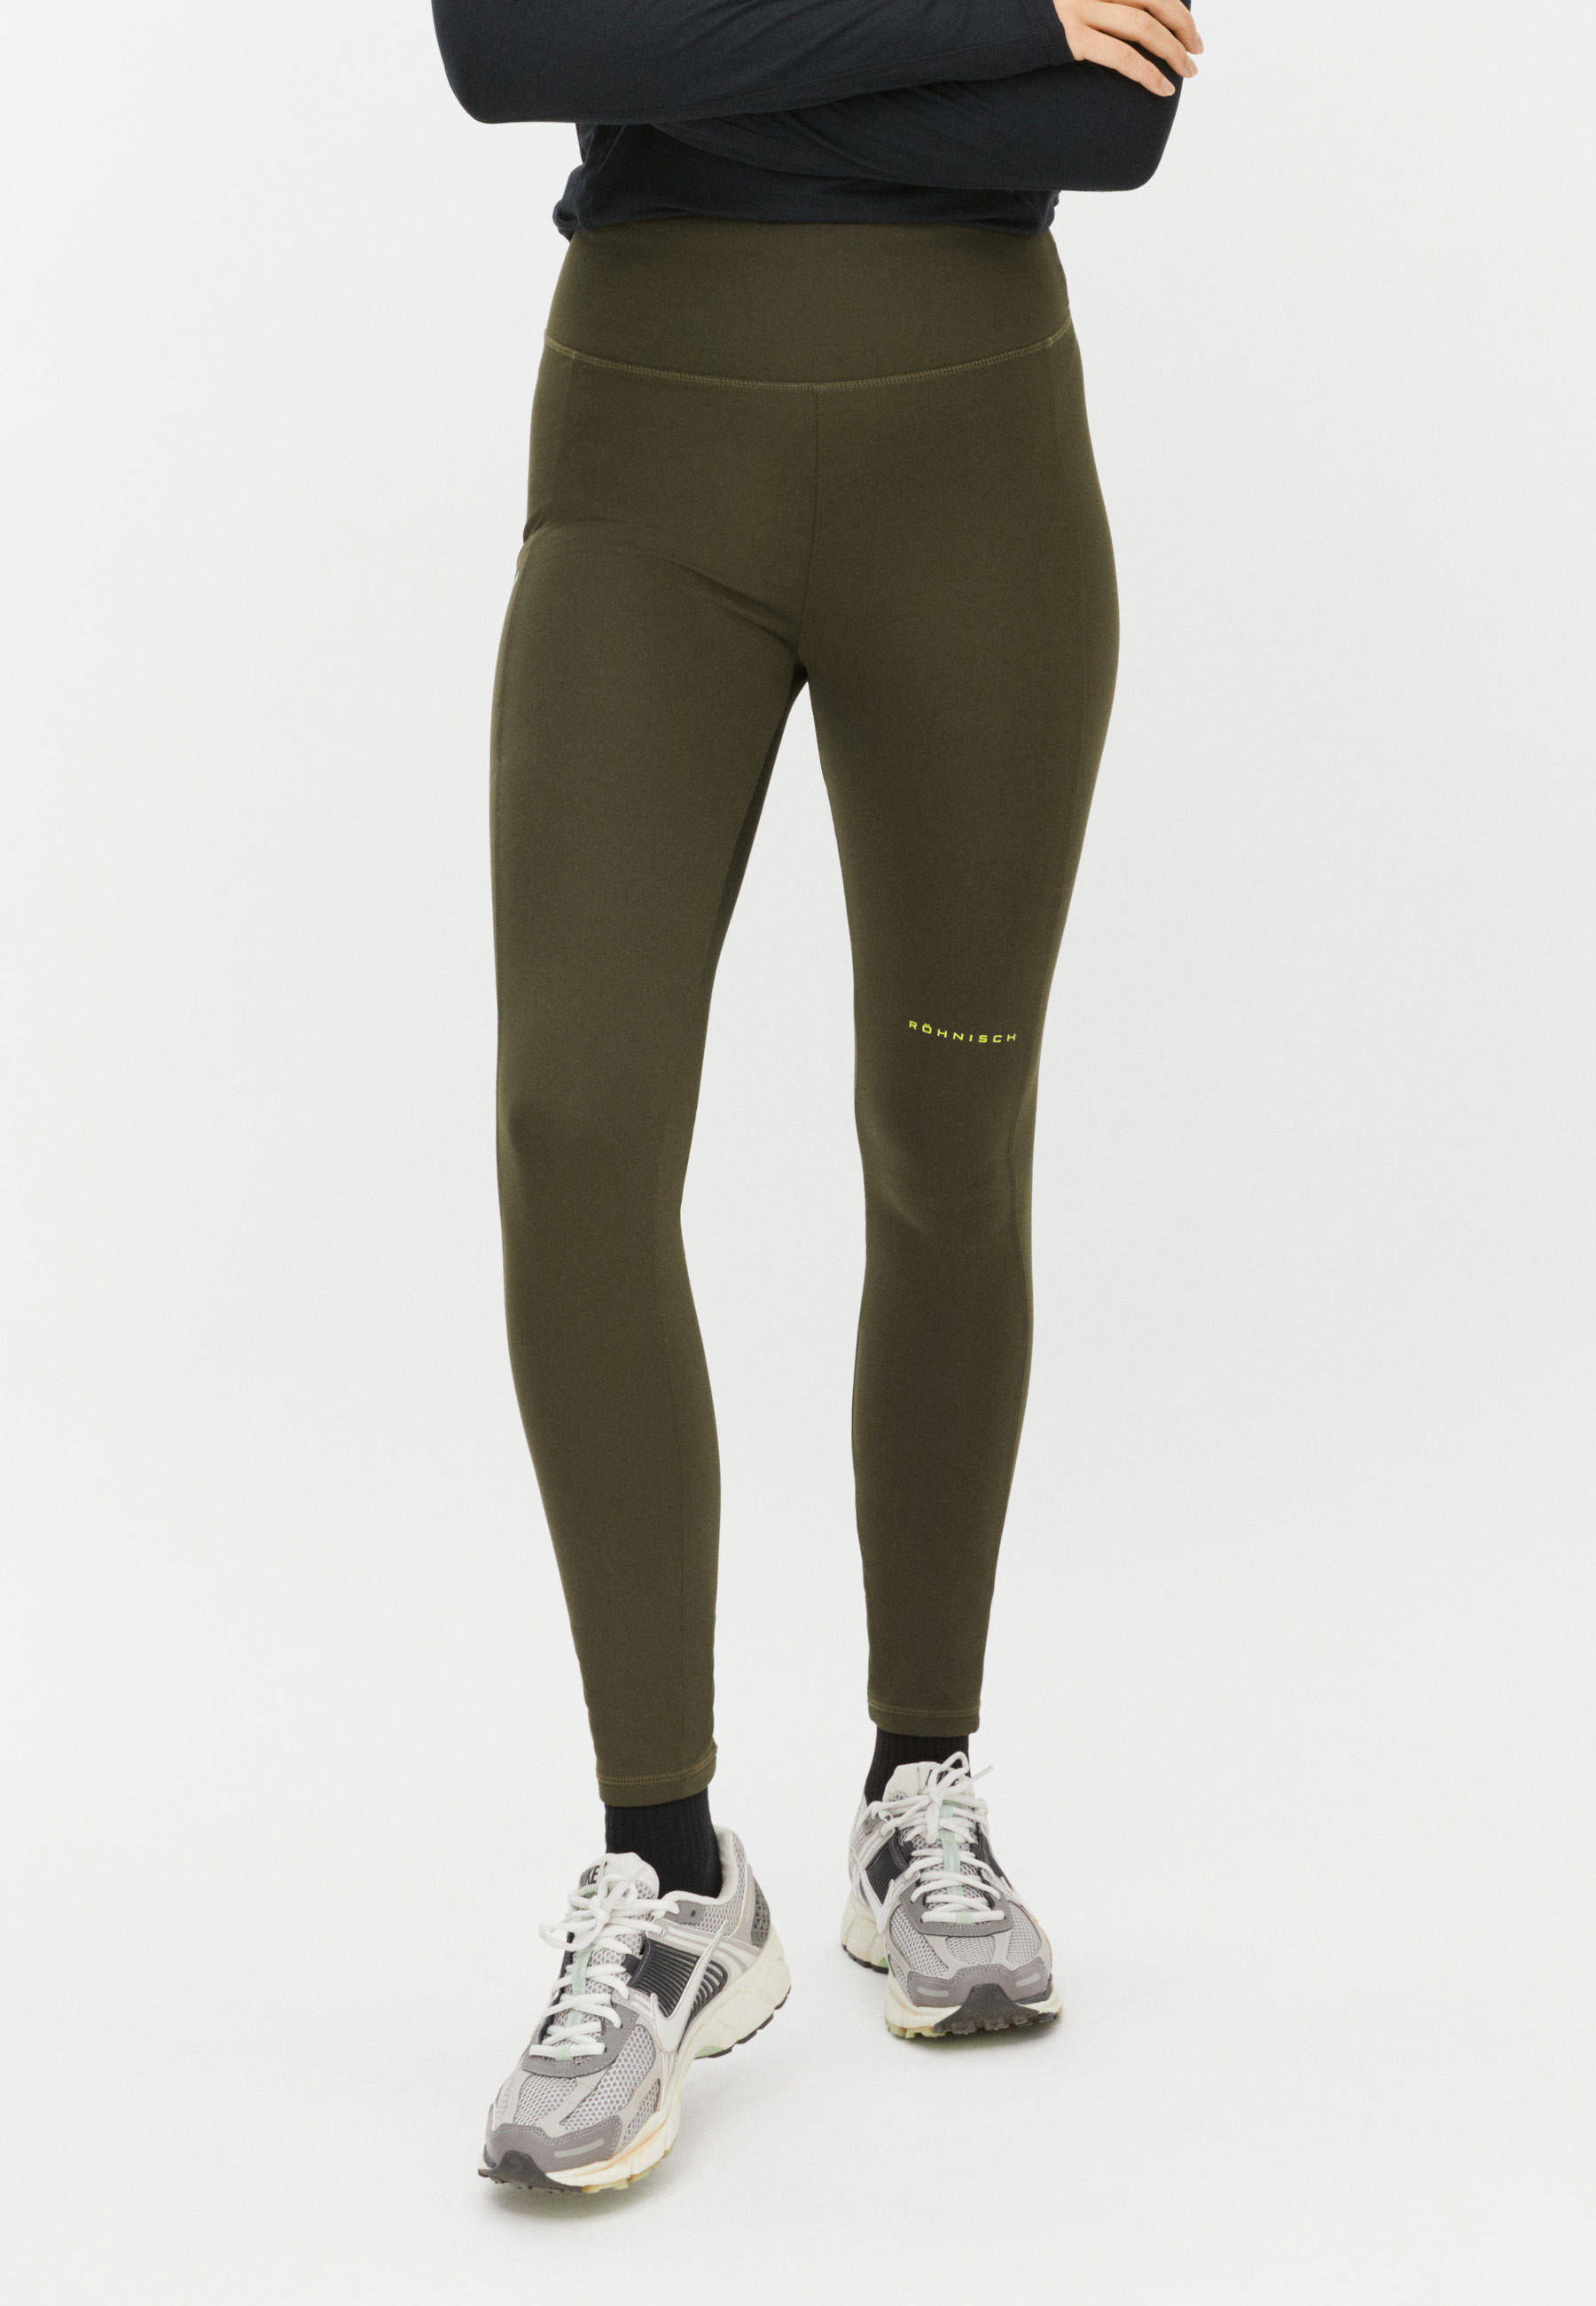 Women's Thermal Tights Forest Brown, Buy Women's Thermal Tights Forest  Brown here